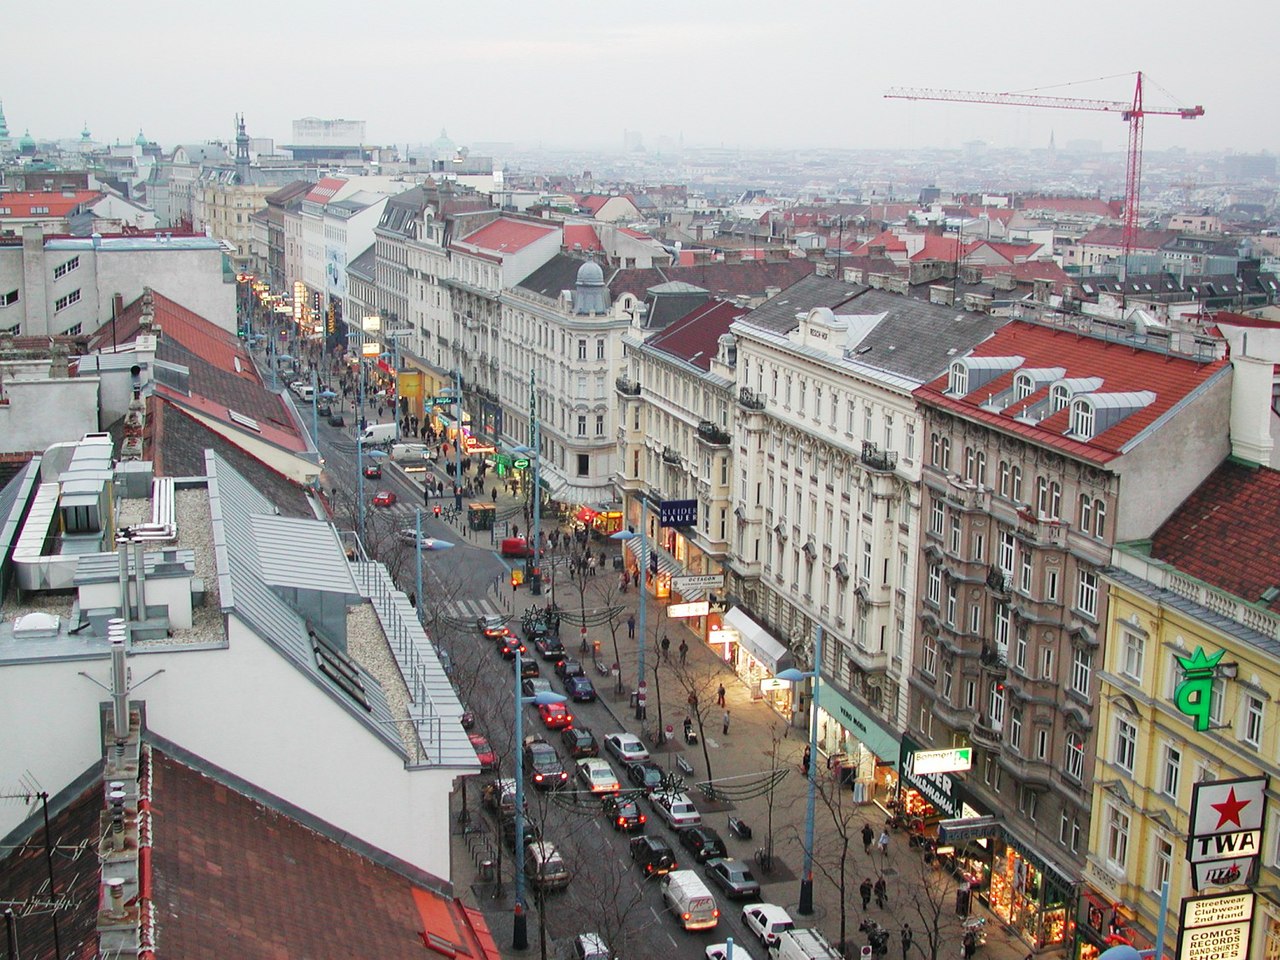 Vídeňská Mariahilferstrasse. Autor: No machine-readable author provided. Herbert Ortner assumed (based on copyright claims). – No machine-readable source provided. Own work assumed (based on copyright claims)., CC BY 2.5, https://commons.wikimedia.org/w/index.php?curid=513541